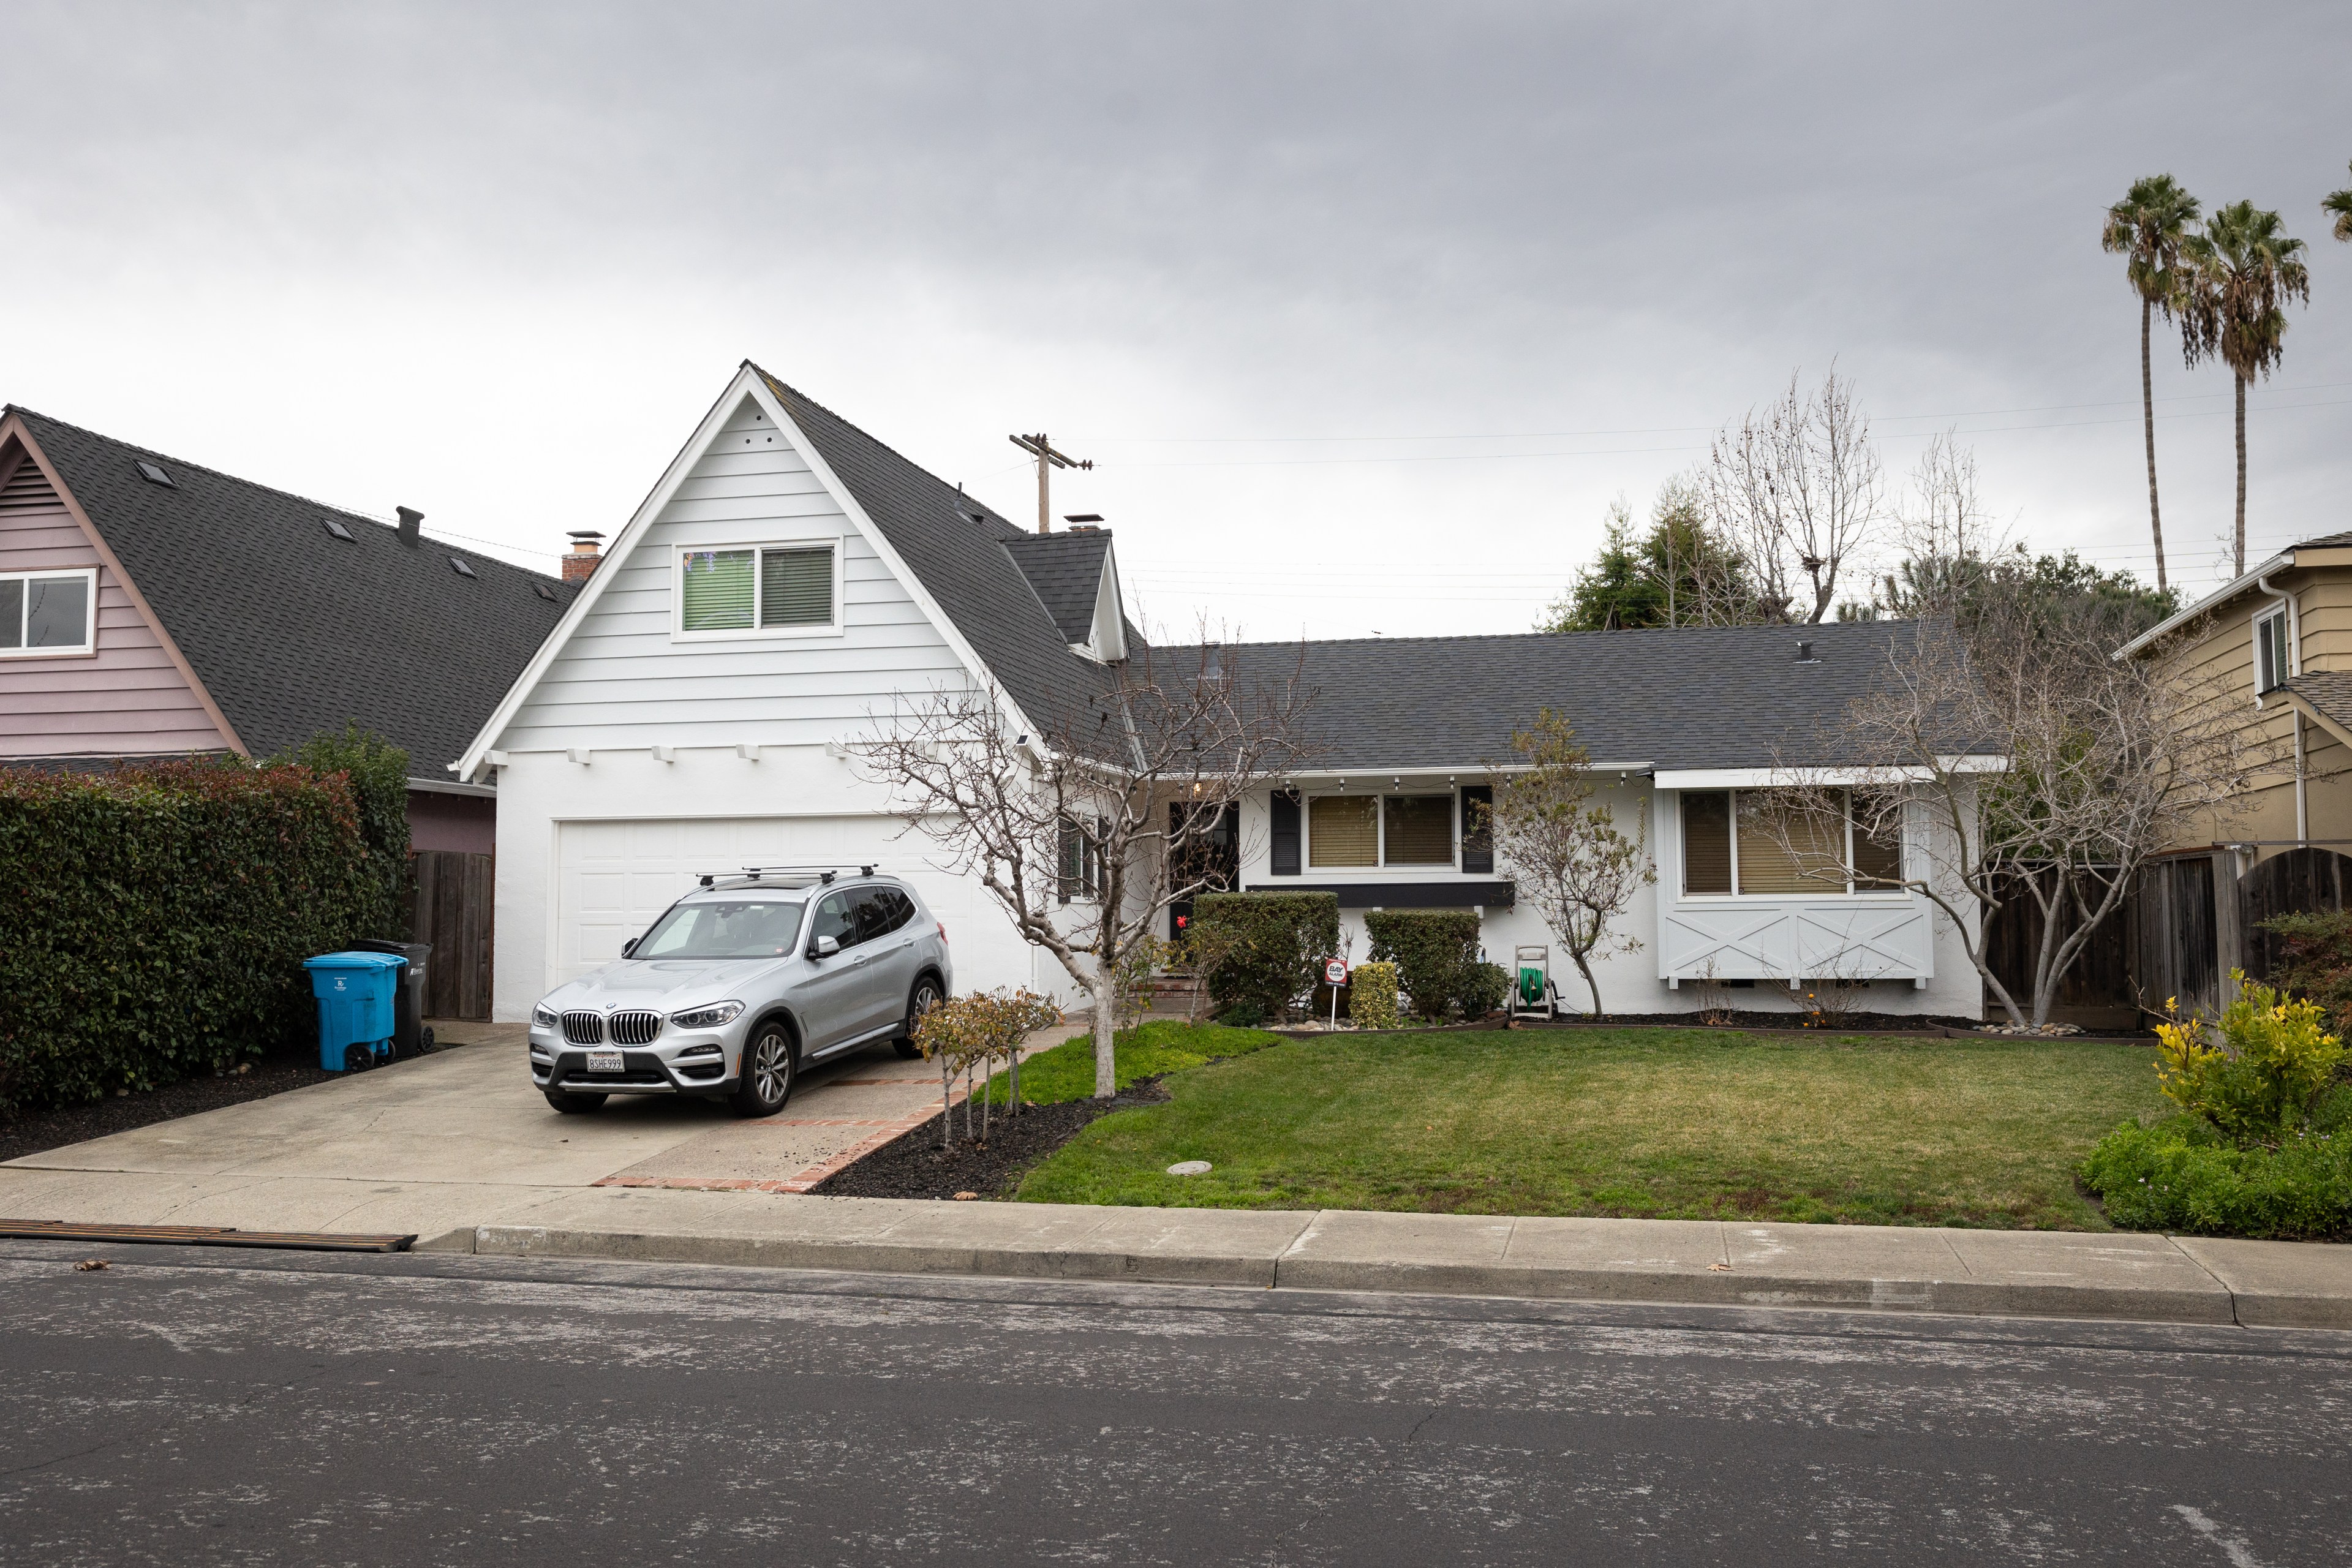 A suburban house with a white garage, driveway, and an SUV parked outside, under overcast skies.